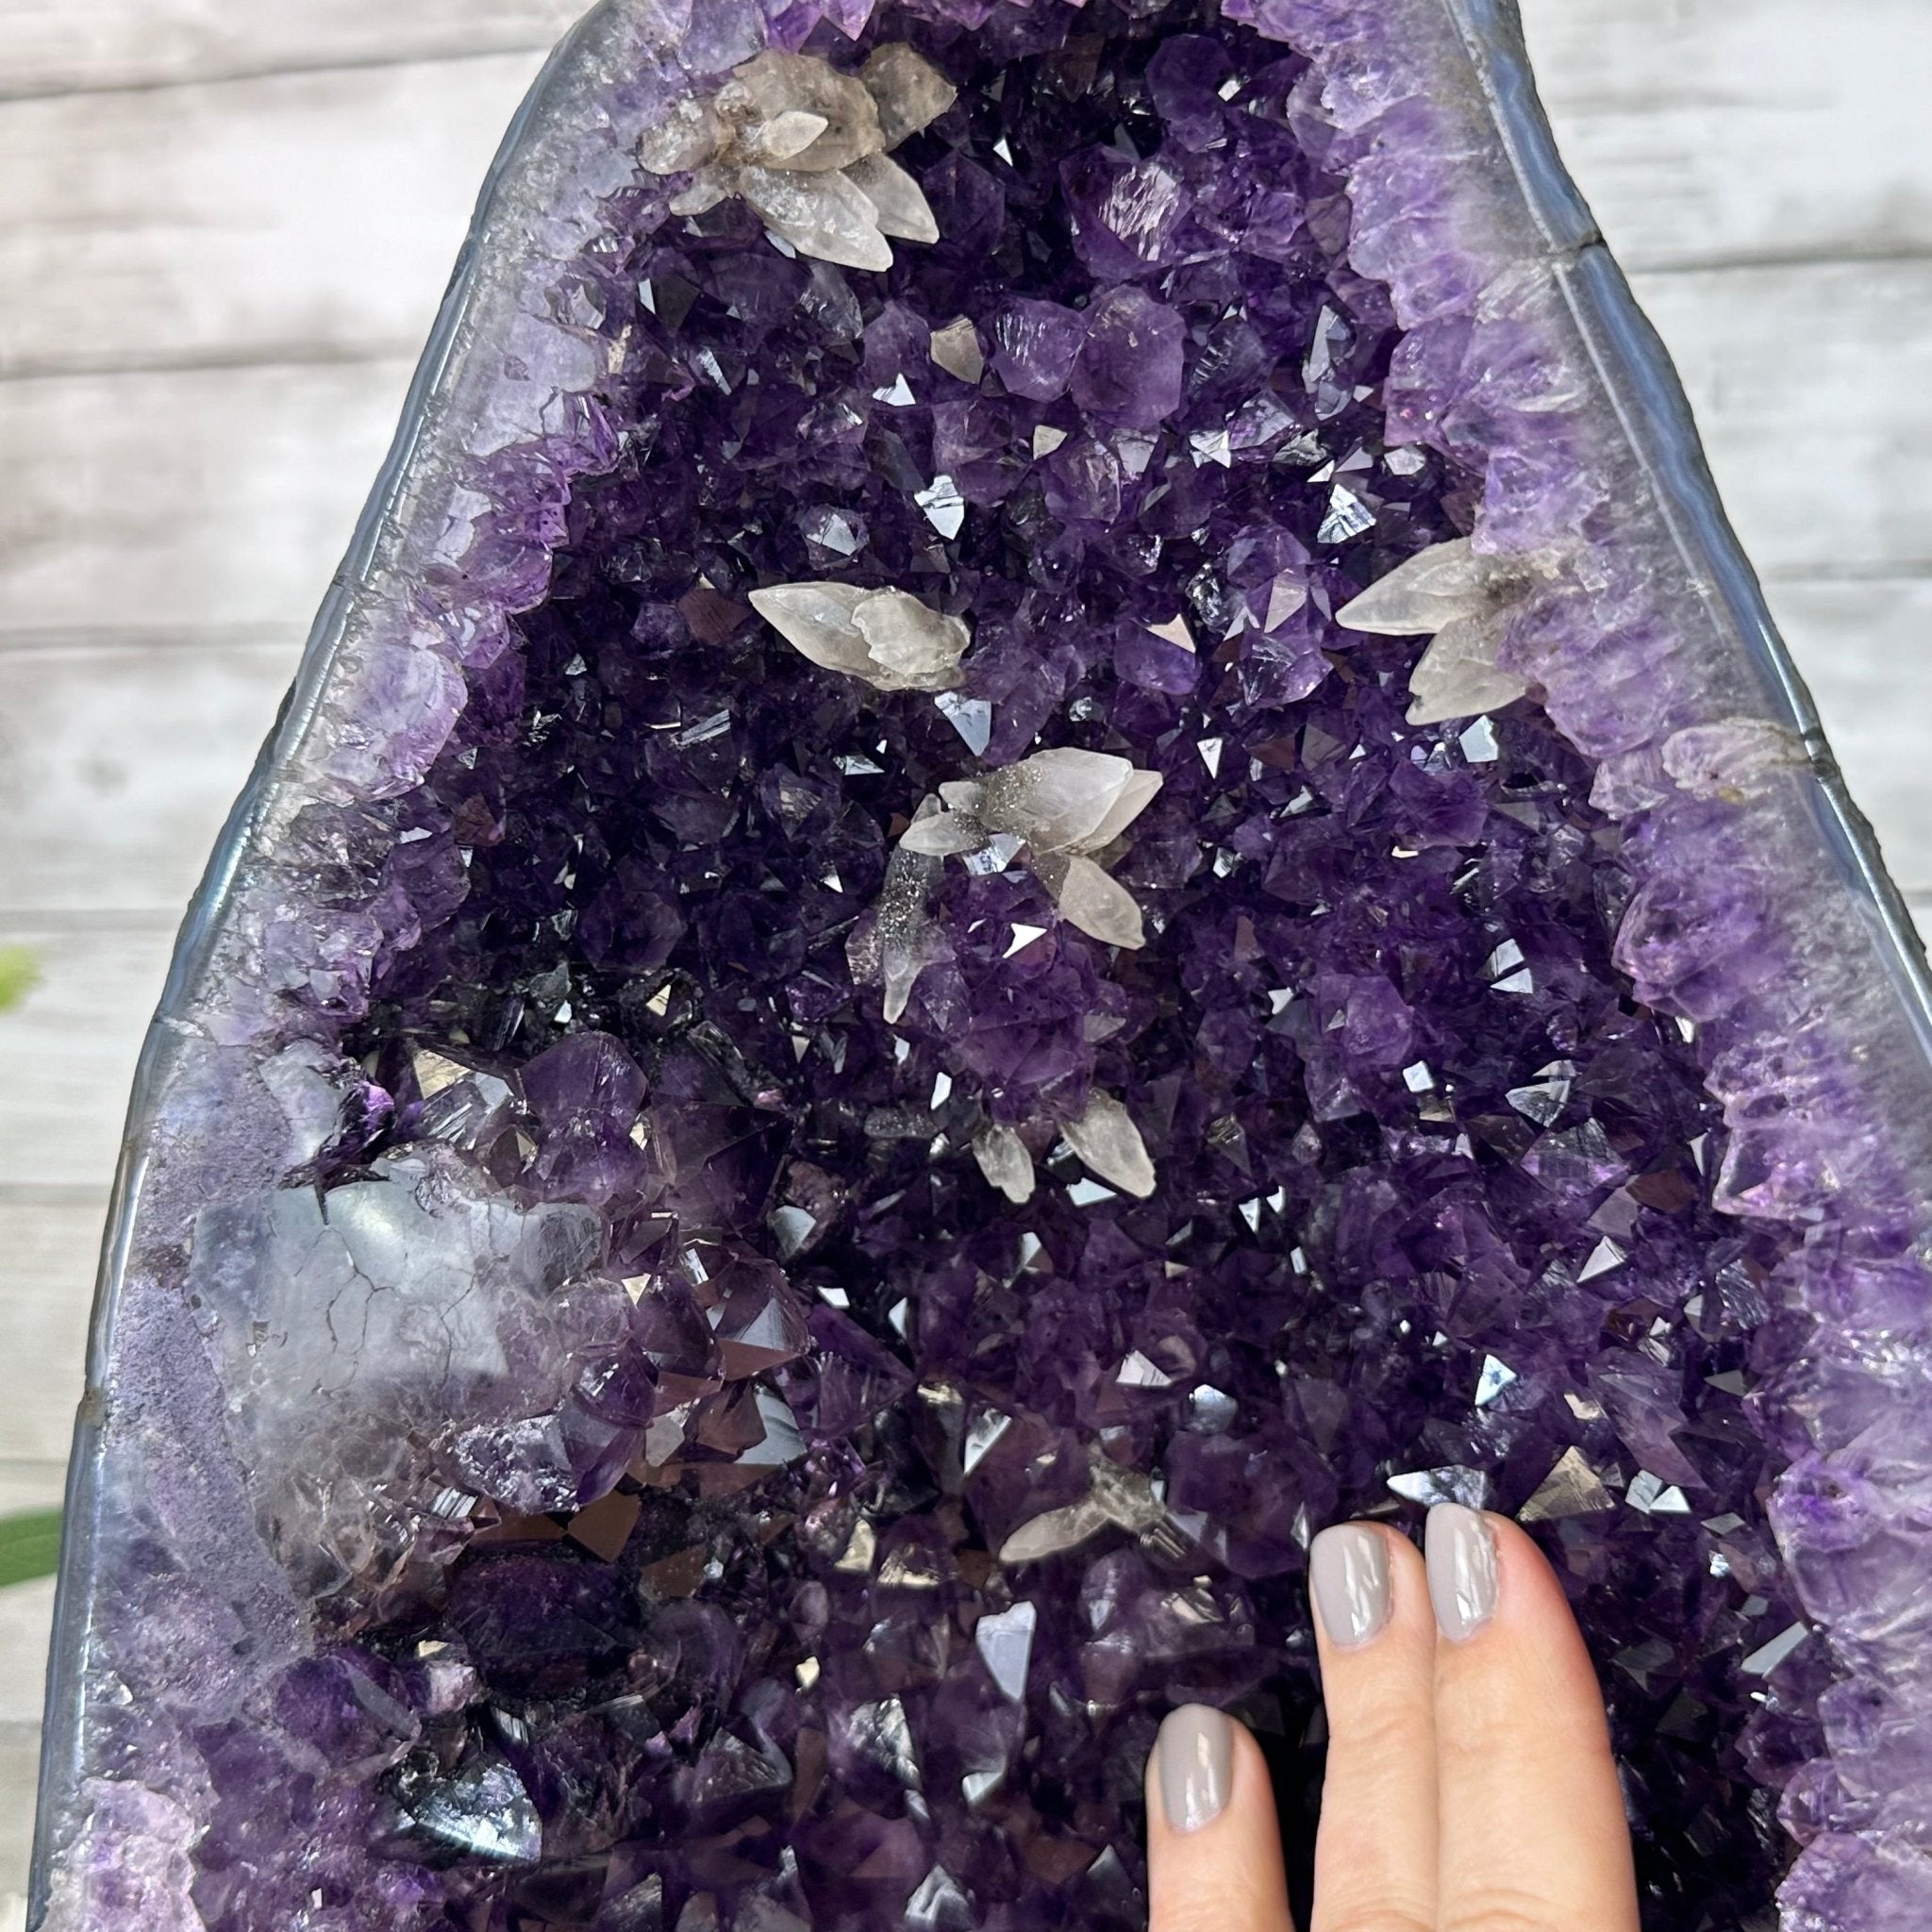 Super Quality Brazilian Amethyst Cathedral, 47.4 lbs & 18.7" Tall #5601-1316 - Brazil GemsBrazil GemsSuper Quality Brazilian Amethyst Cathedral, 47.4 lbs & 18.7" Tall #5601-1316Cathedrals5601-1316